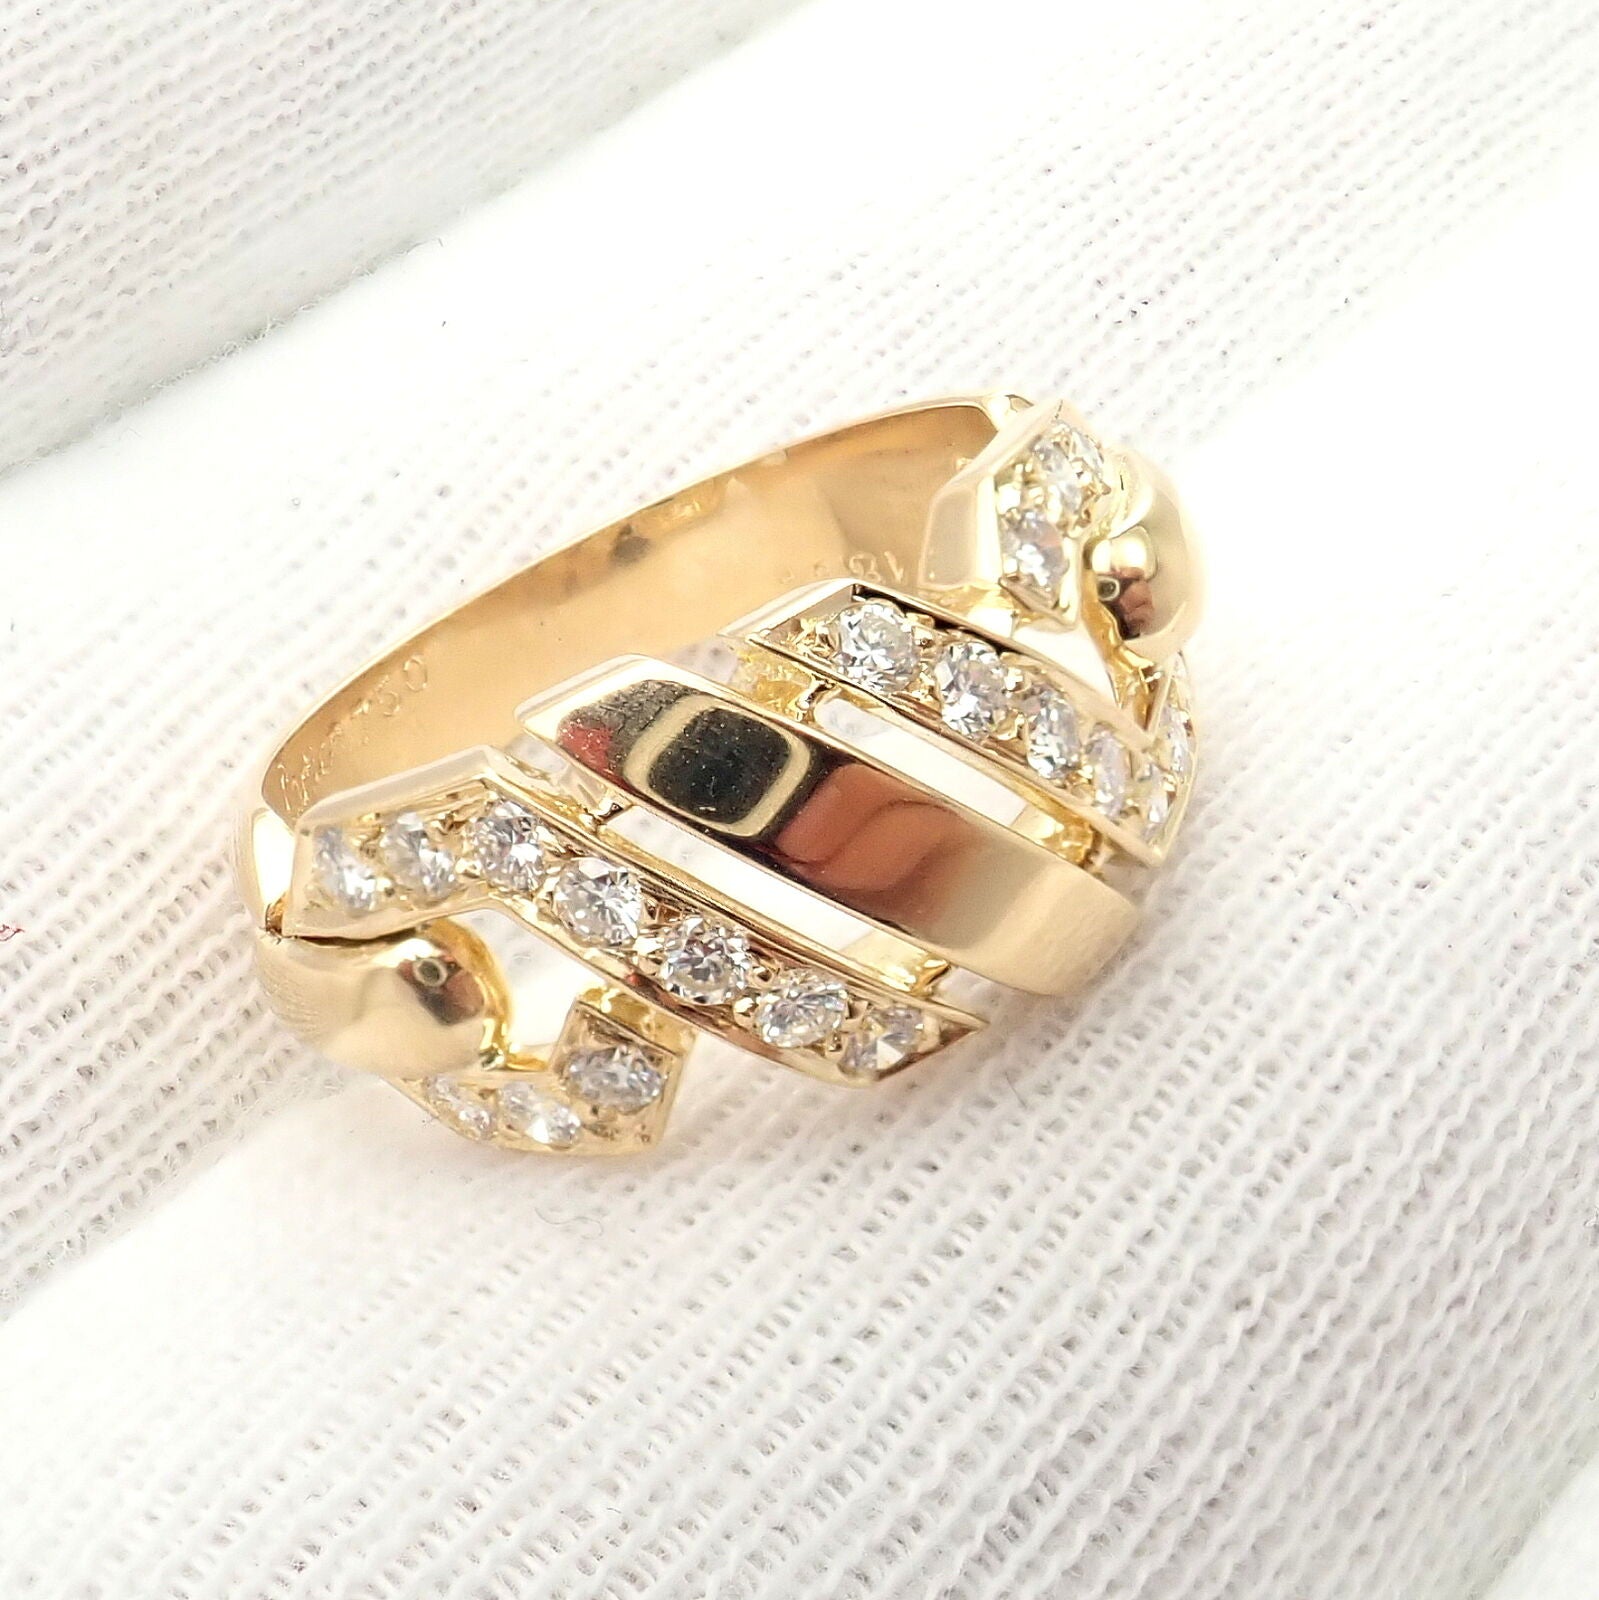 Cartier Jewelry & Watches:Fine Jewelry:Rings Authentic! Cartier Vintage Fox Trot 18k Yellow Gold Diamond Ring sz 6.5 1980's